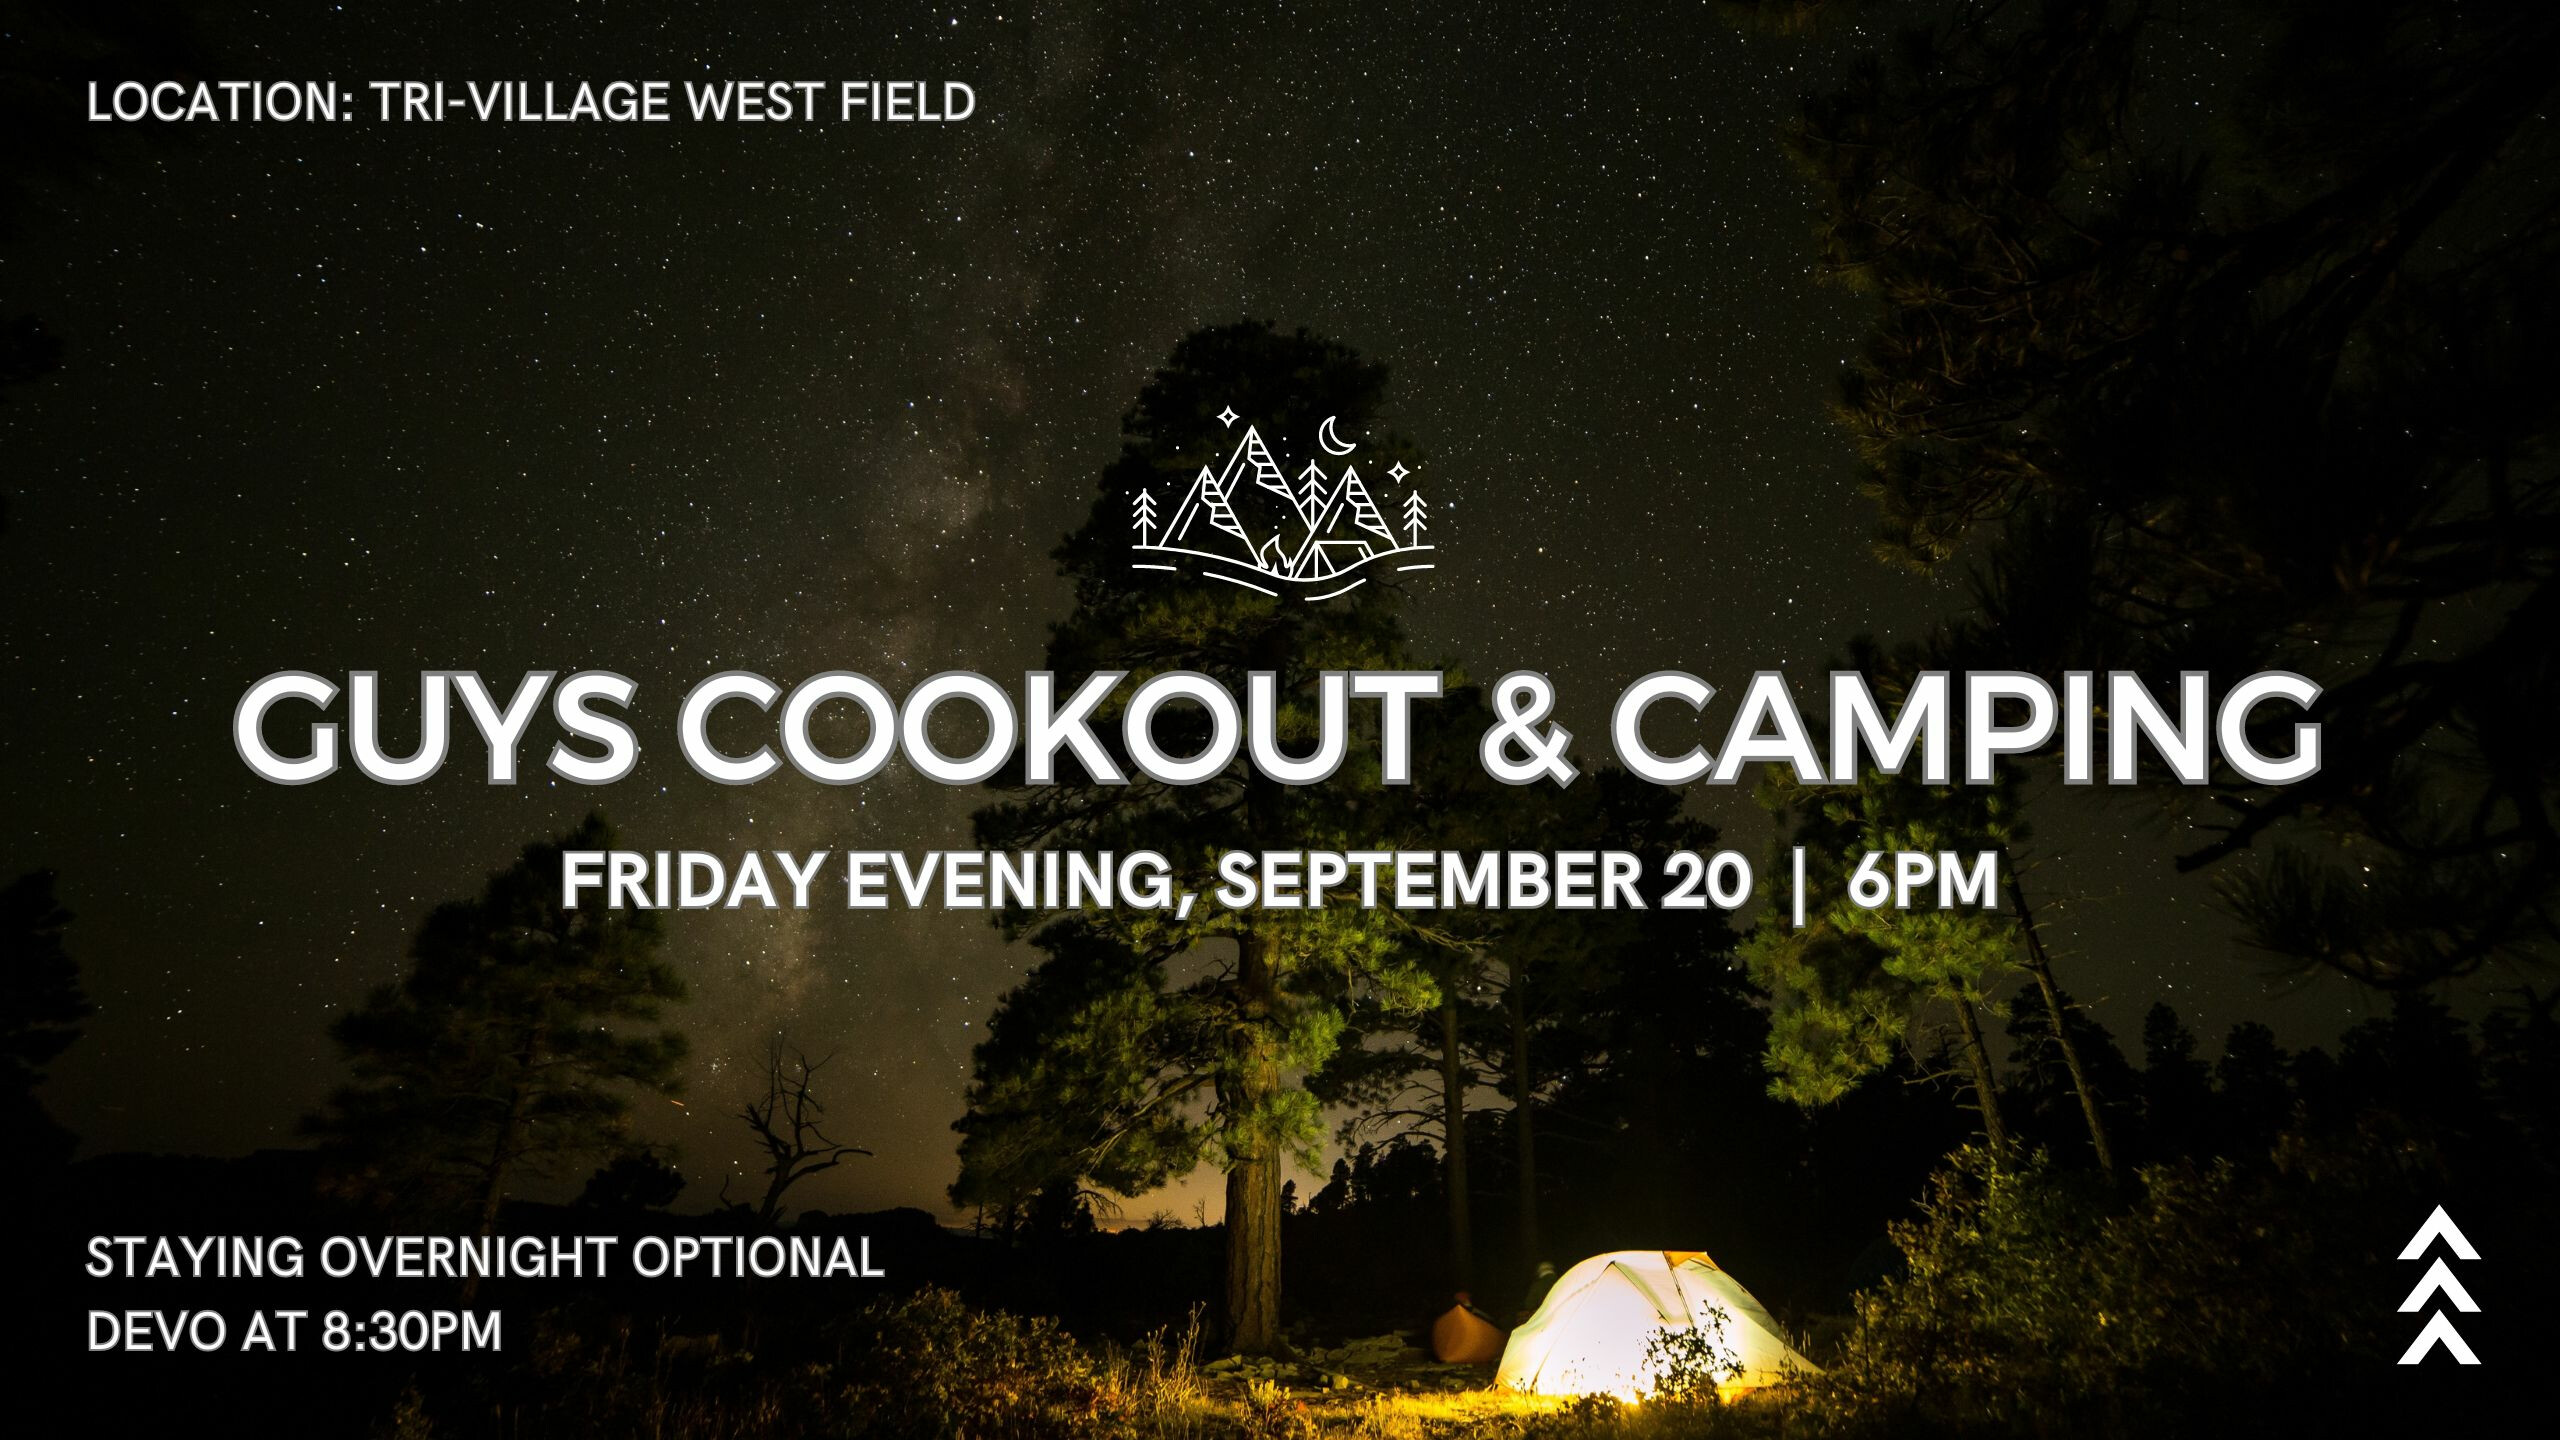 Guys Cookout & Camping